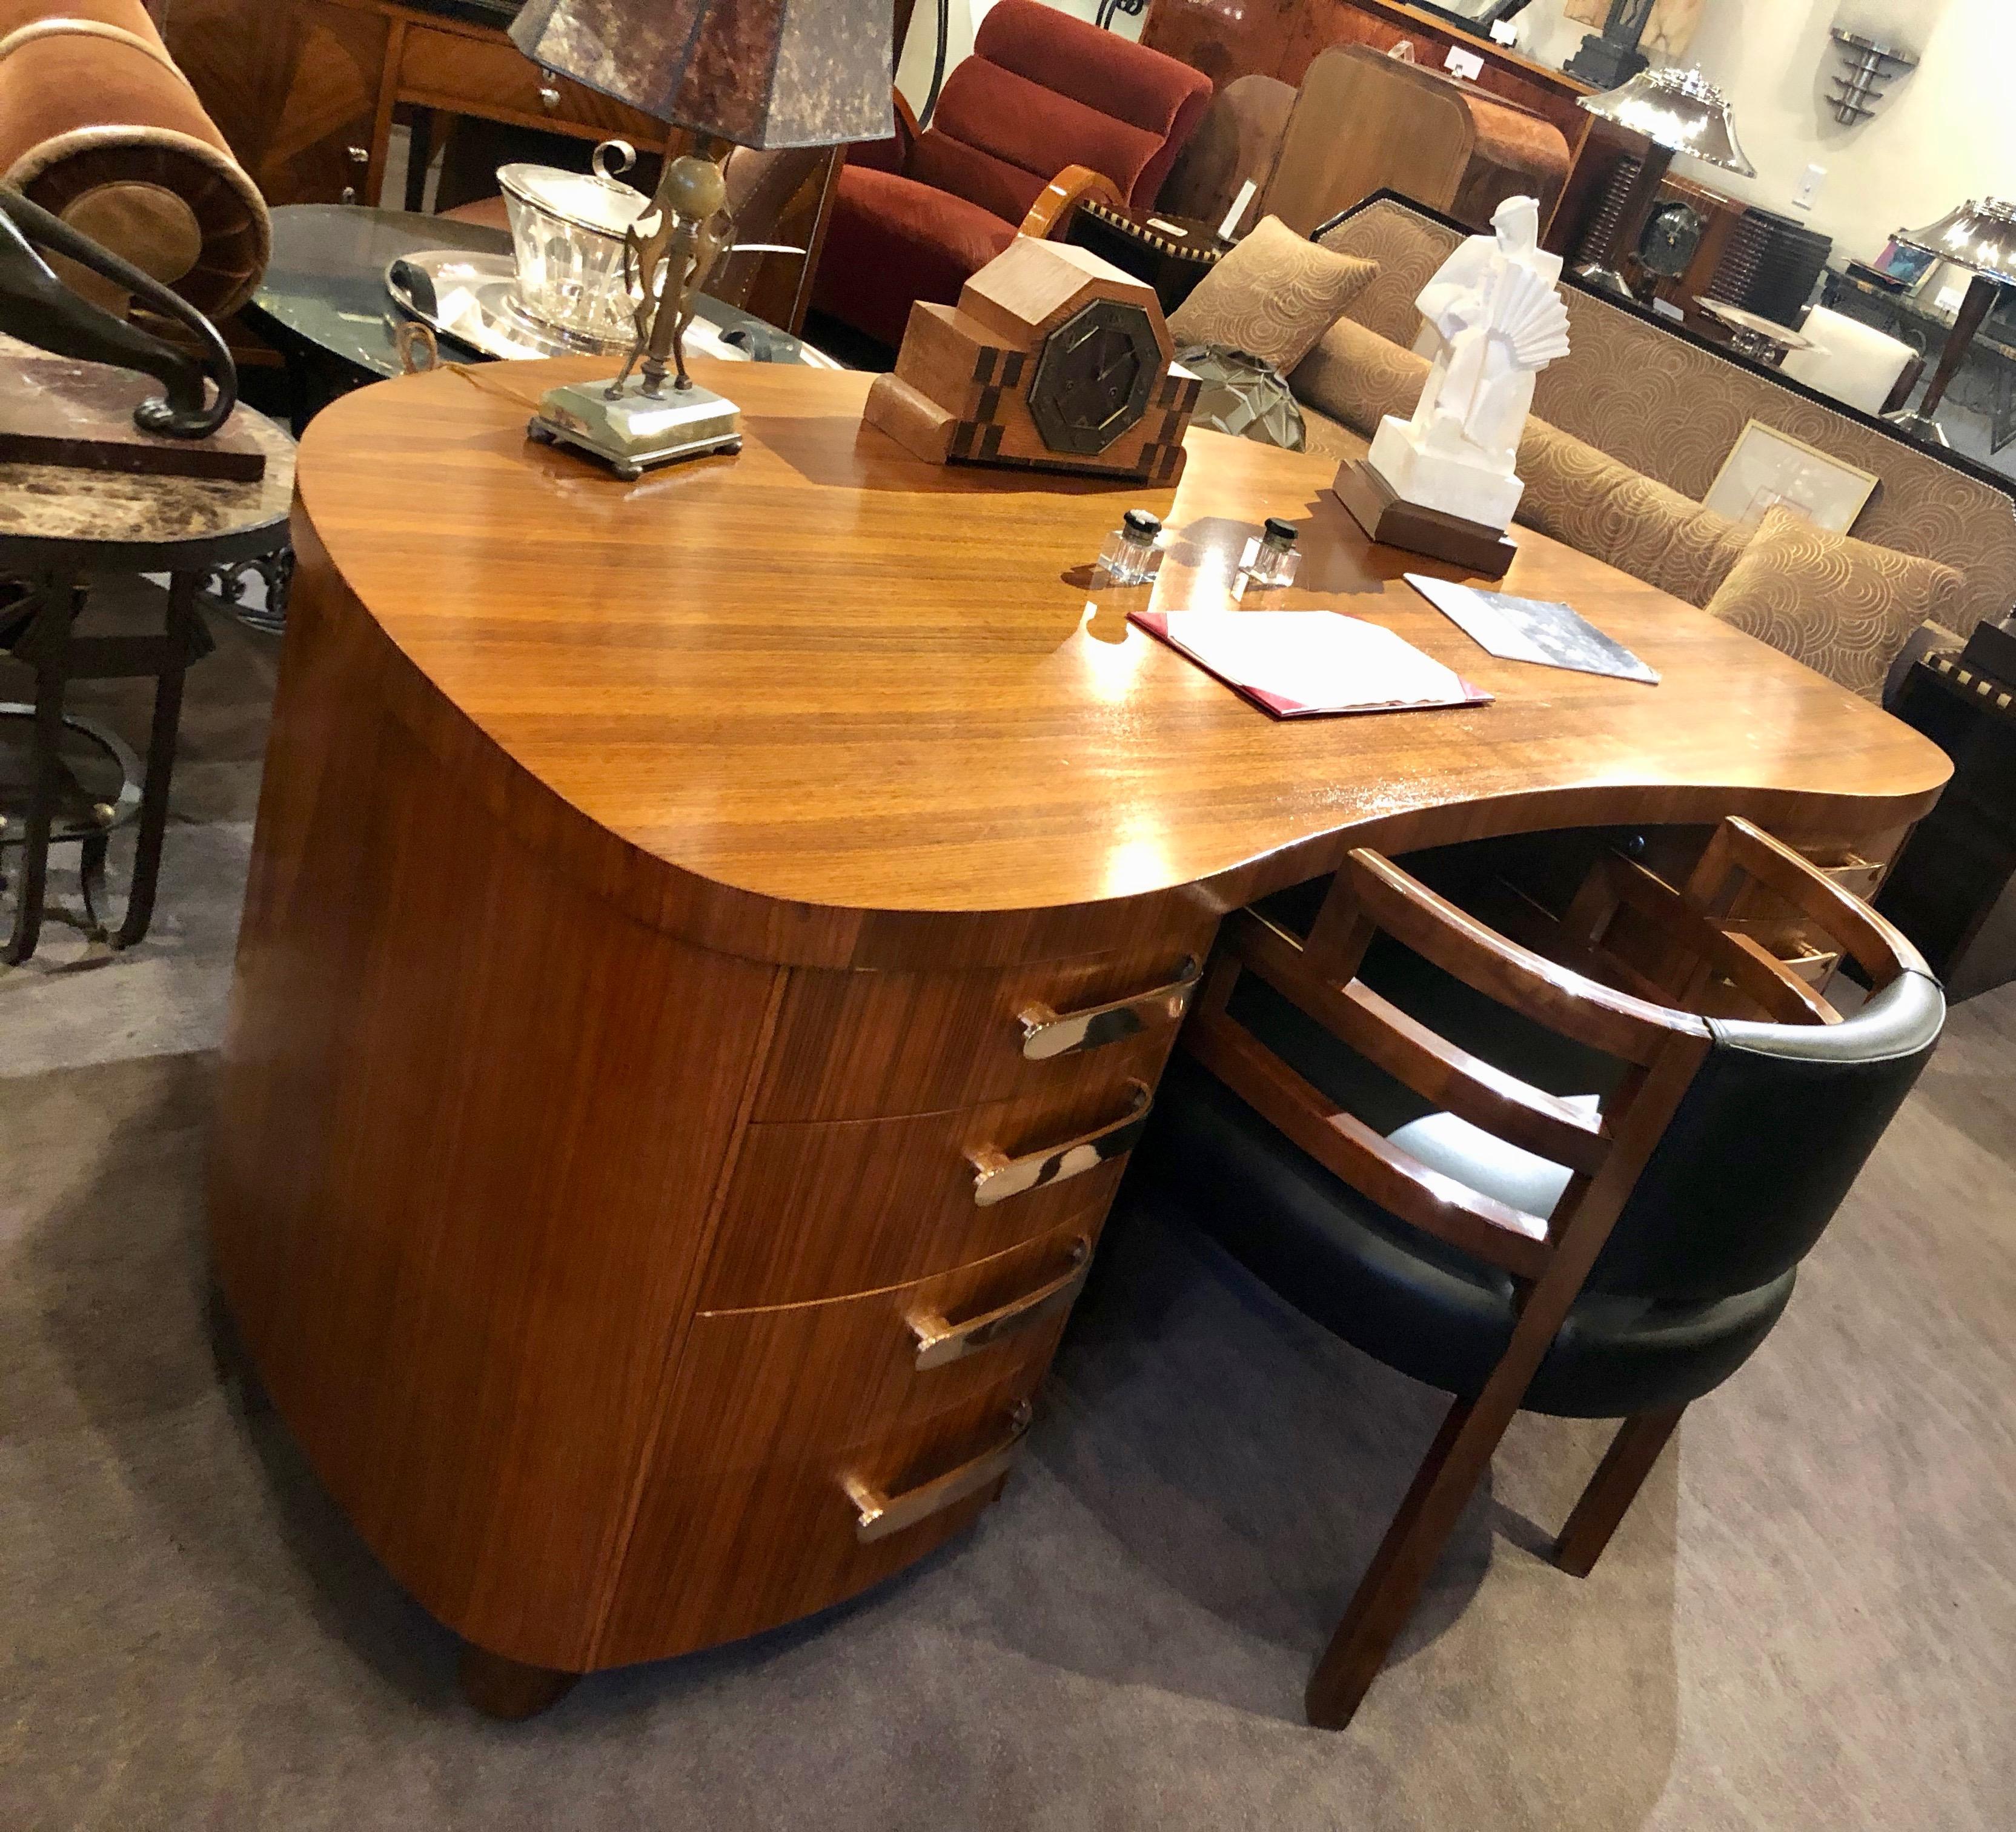 Professional Art Deco Midcentury Desk by Stow and Davis 1